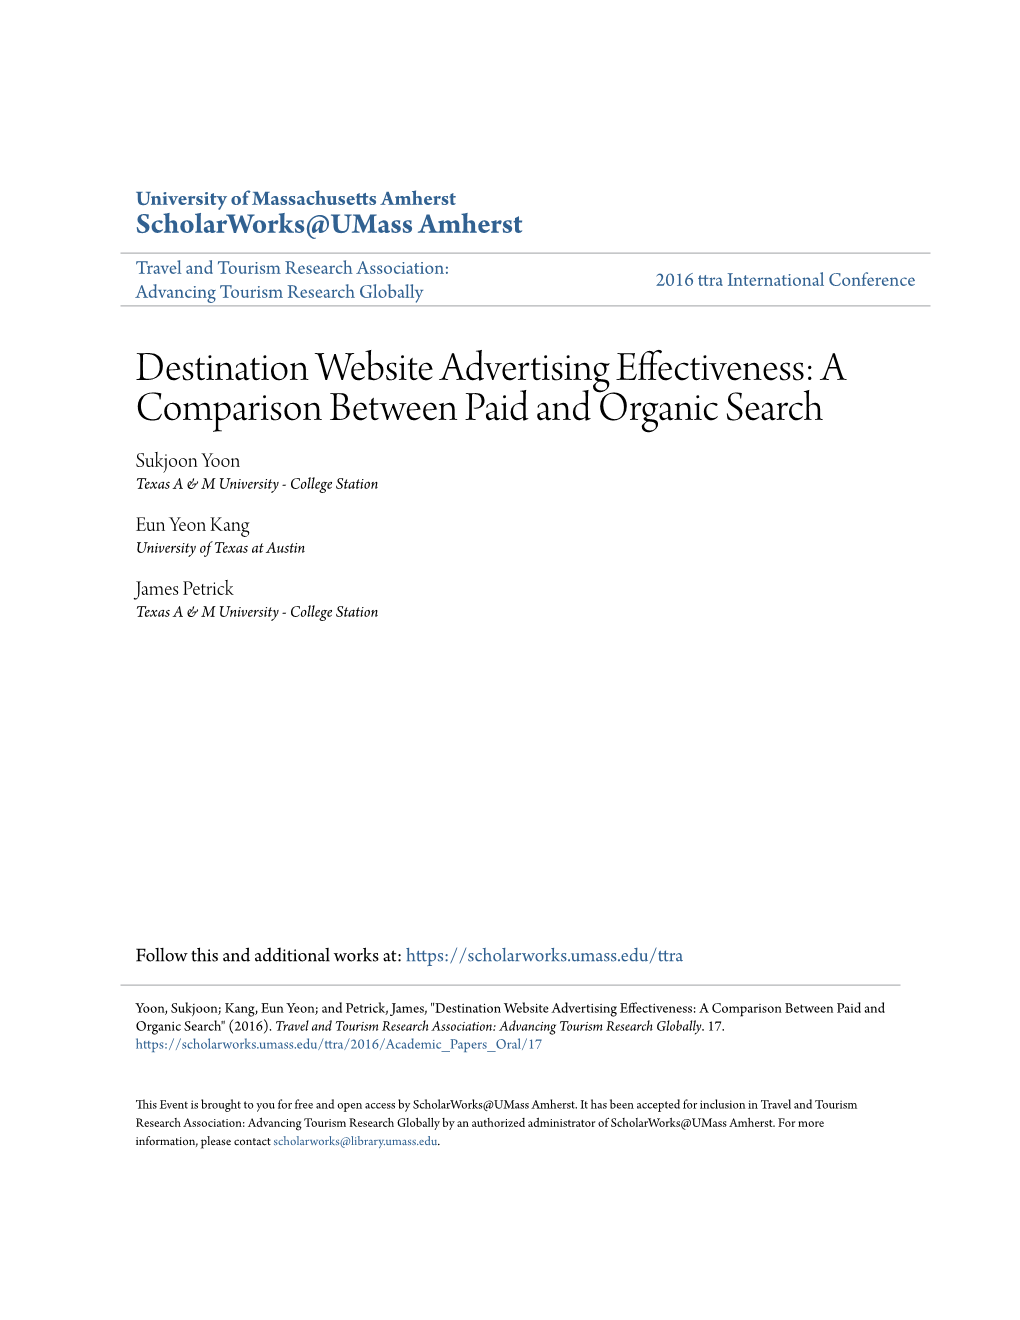 Destination Website Advertising Effectiveness: a Comparison Between Paid and Organic Search Sukjoon Yoon Texas a & M University - College Station